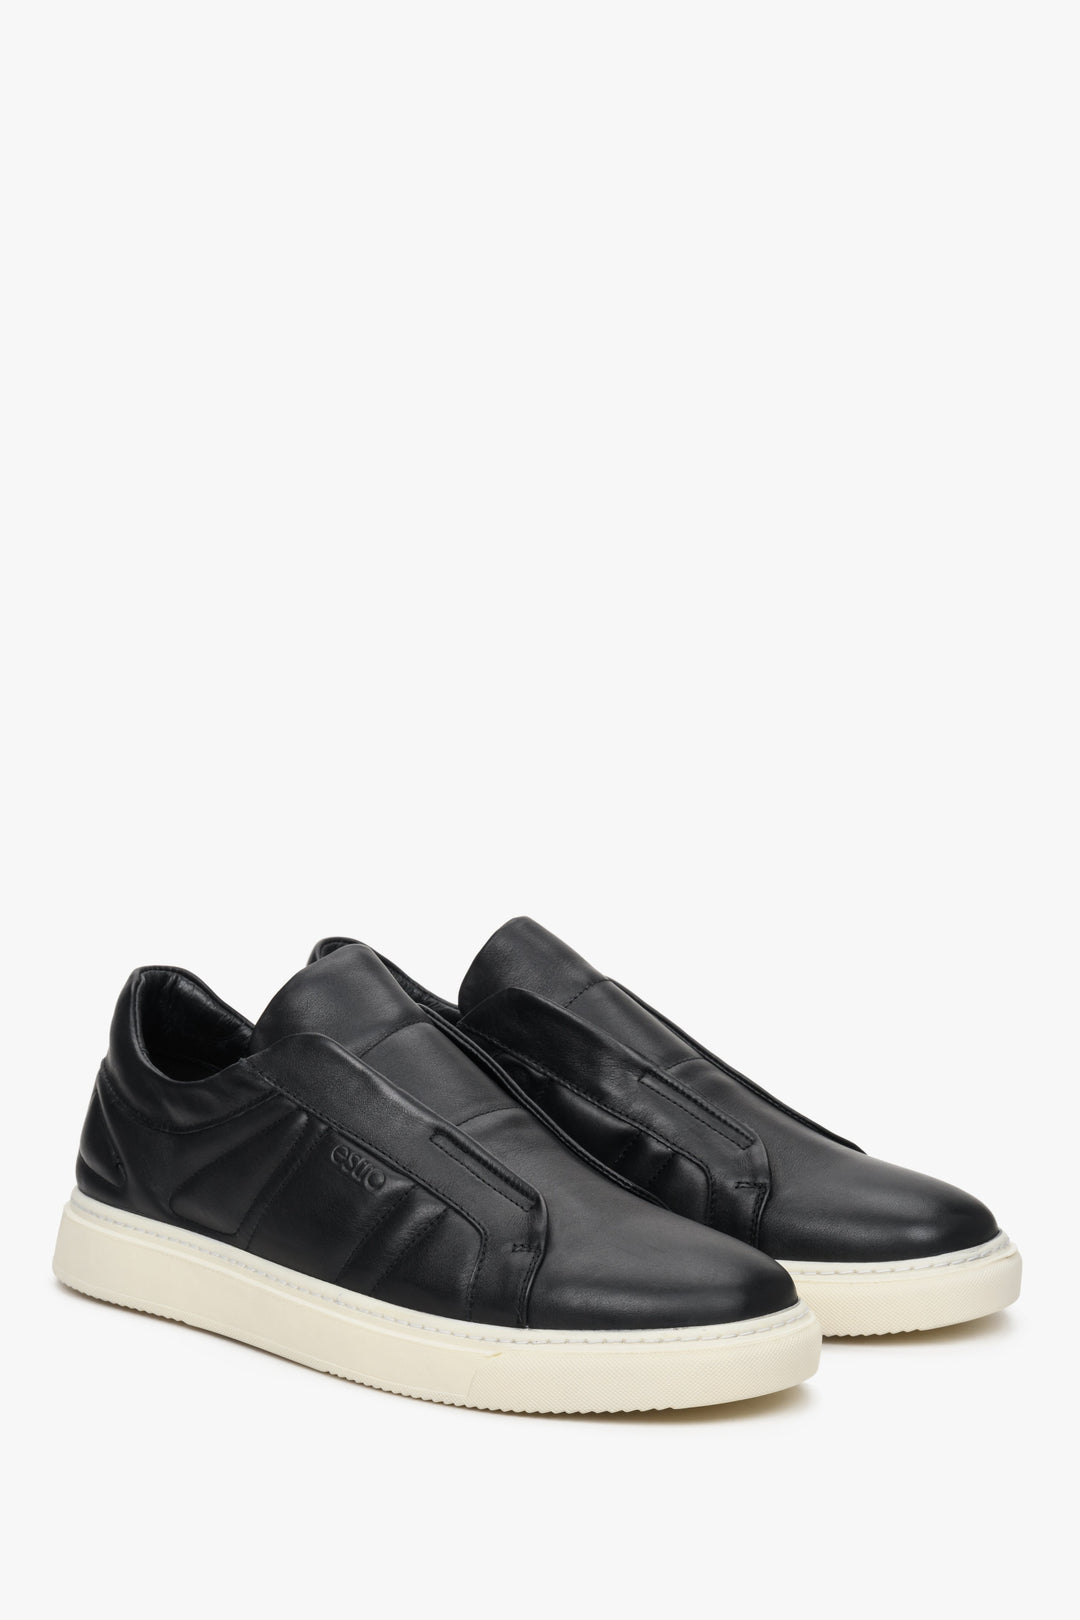 Men's black leather Estro  slip-on sneakers without laces - close-up of the shoe's toe and side seam.